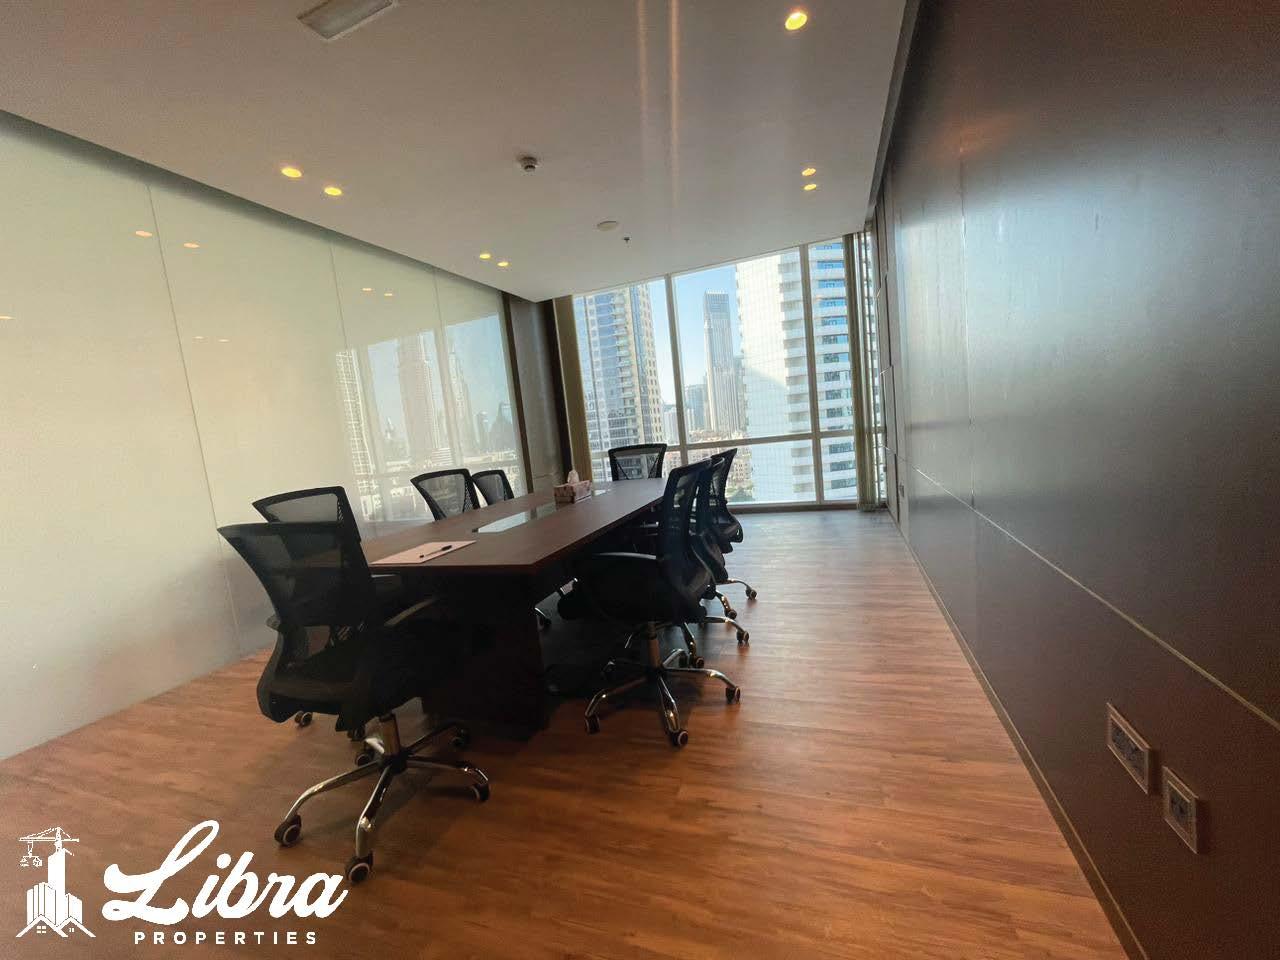 Office Space for sale in Tamani Art Tower, Business Bay, Dubai for price AED 2380000 